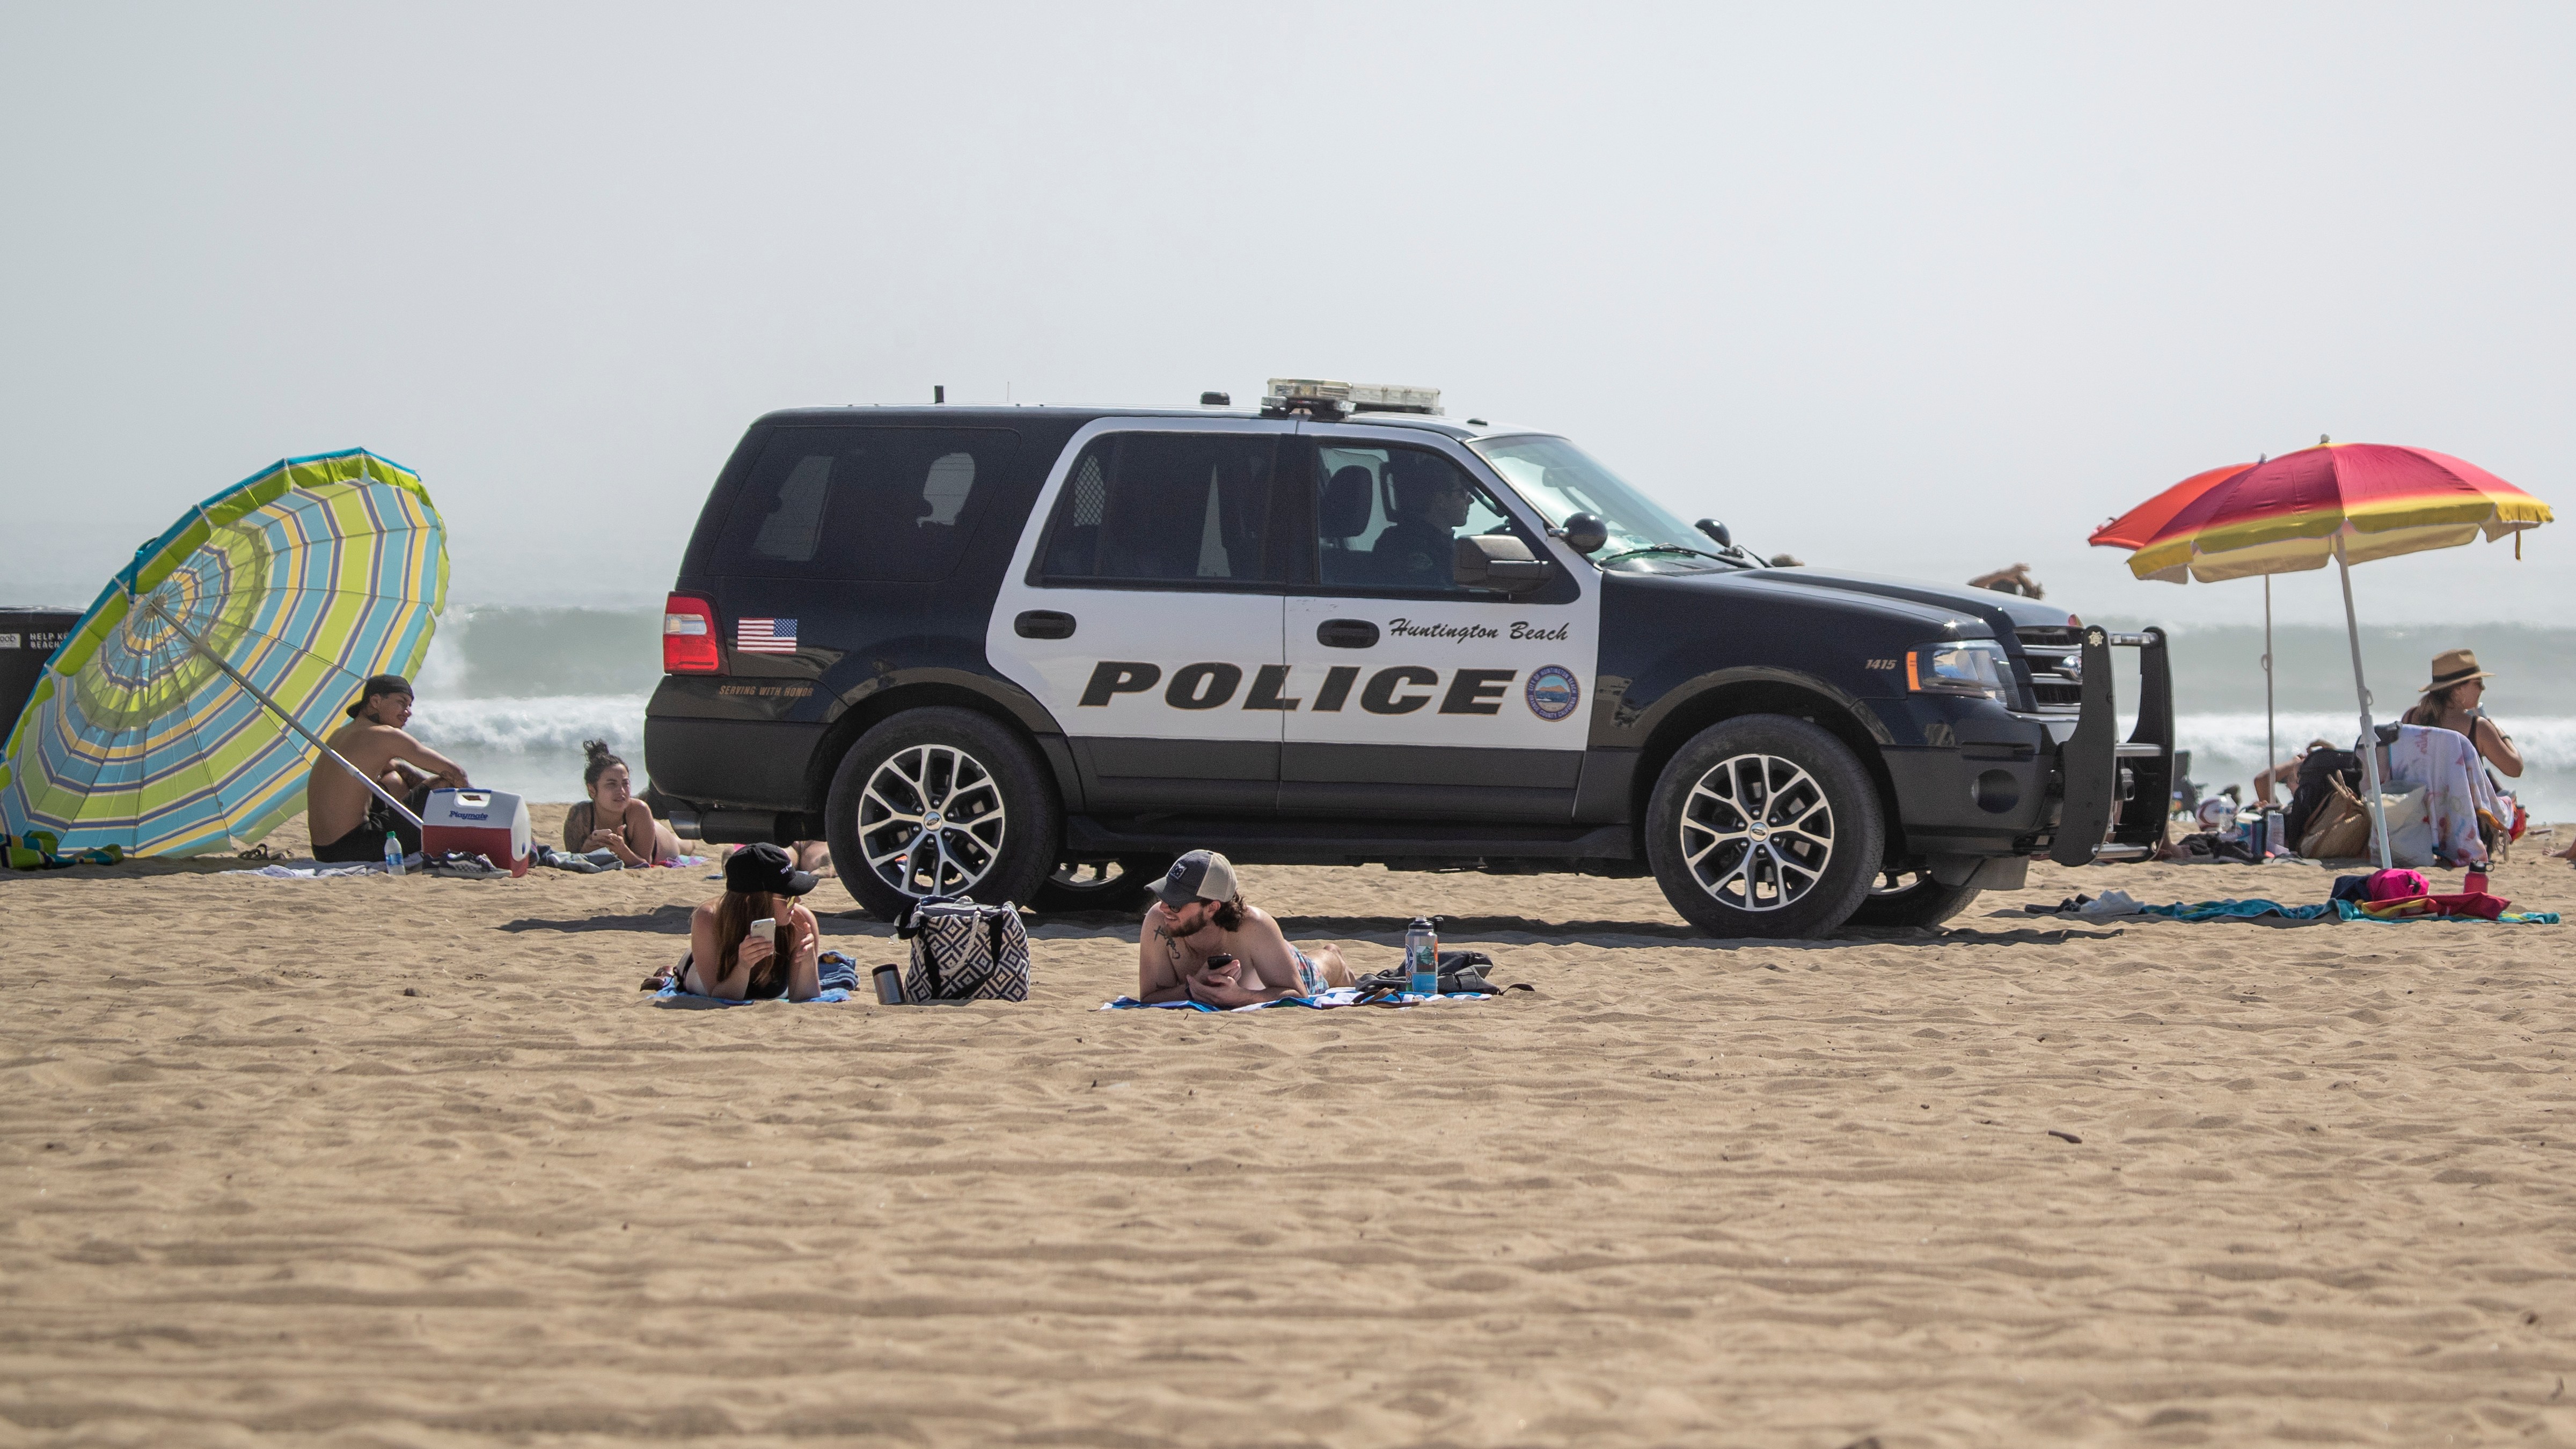 Arrests made when the weather is hot are more likely to be overturned, a large US study found